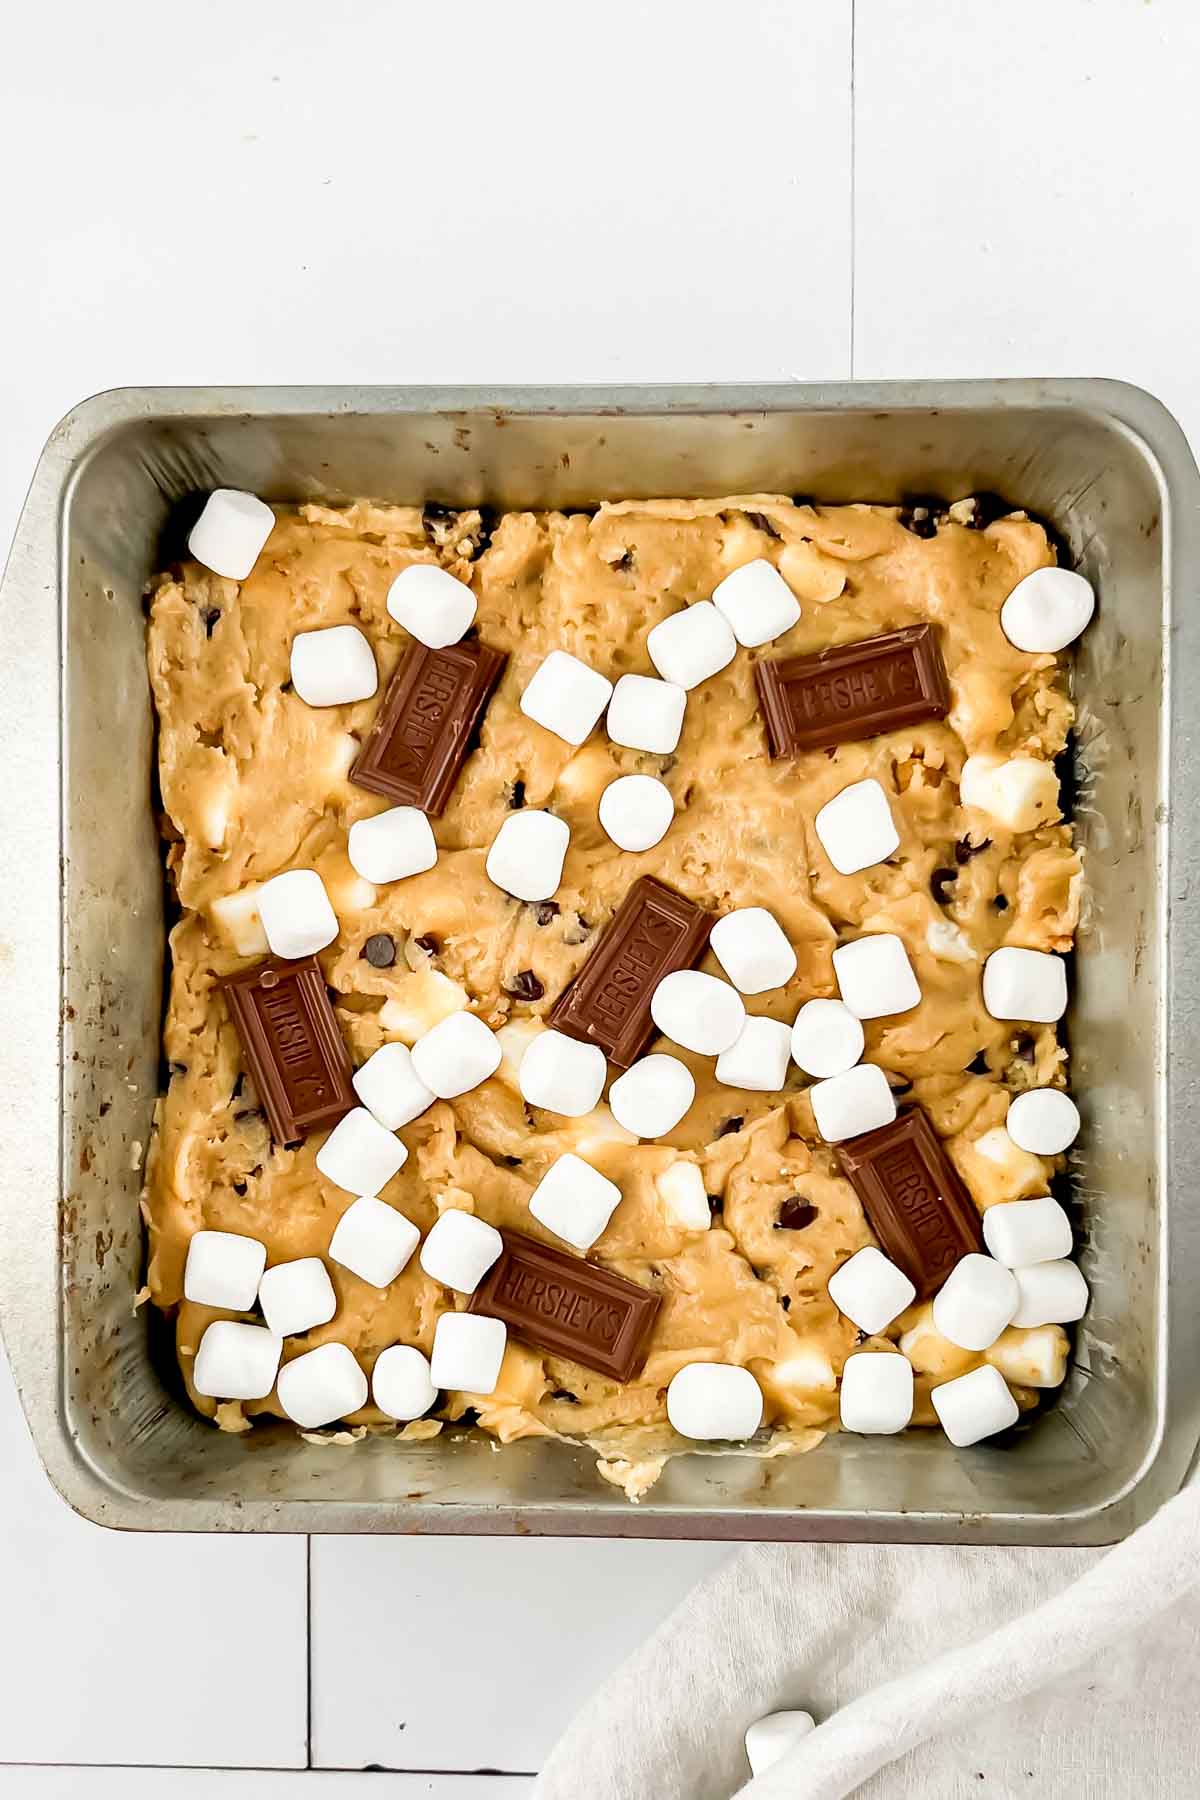 Smores casserole in square pan before baking topped with hersheys squares and marshmallows on top.